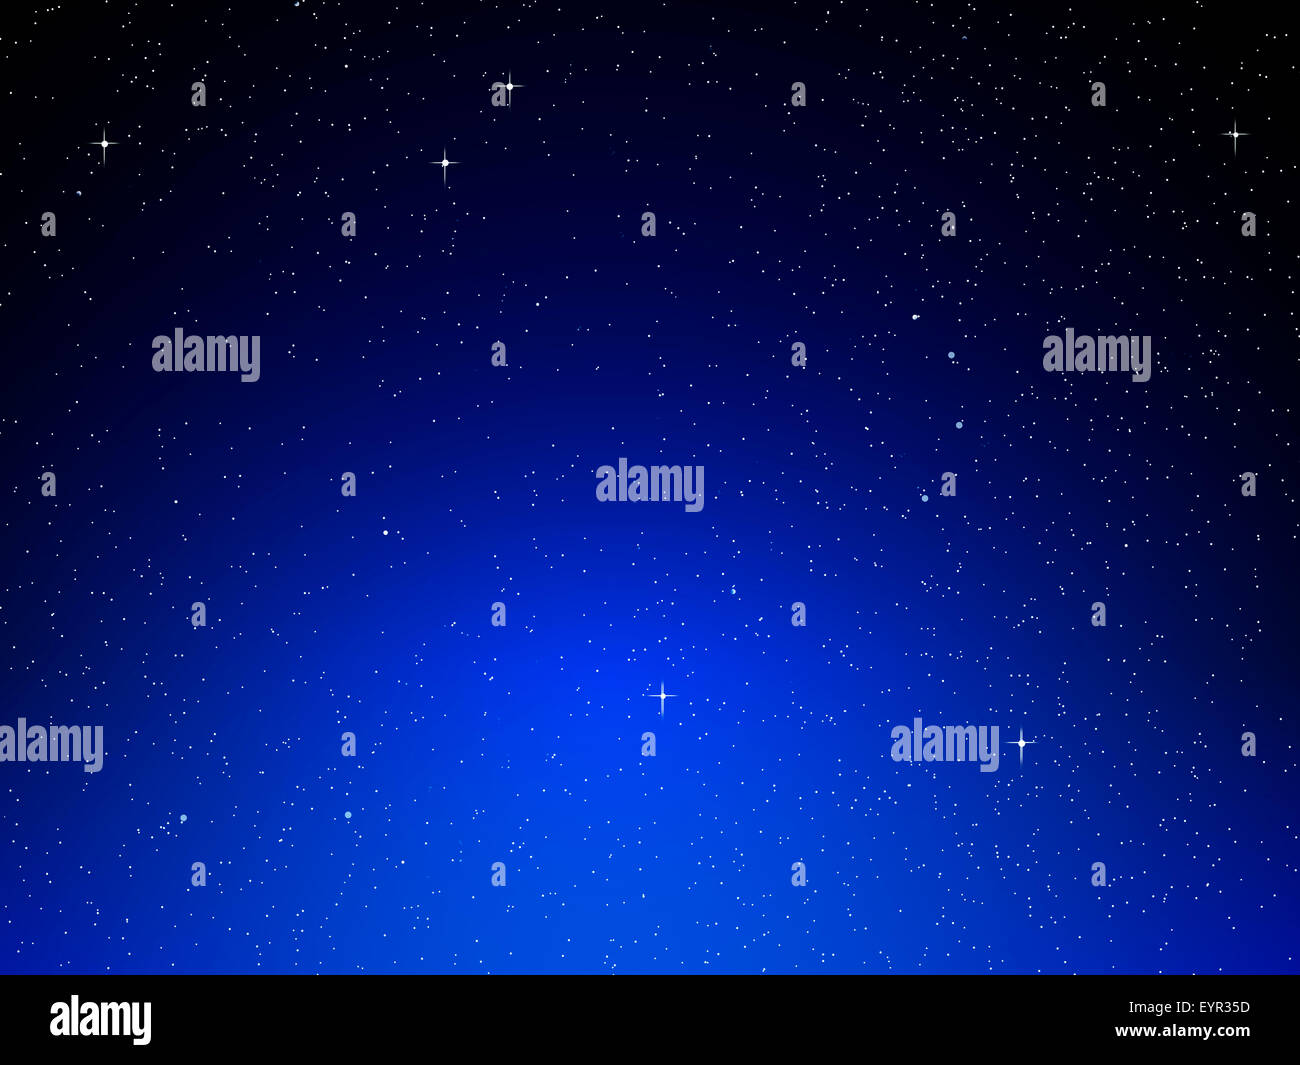 Illustration of night sky with simulated stars on blue background Stock Photo